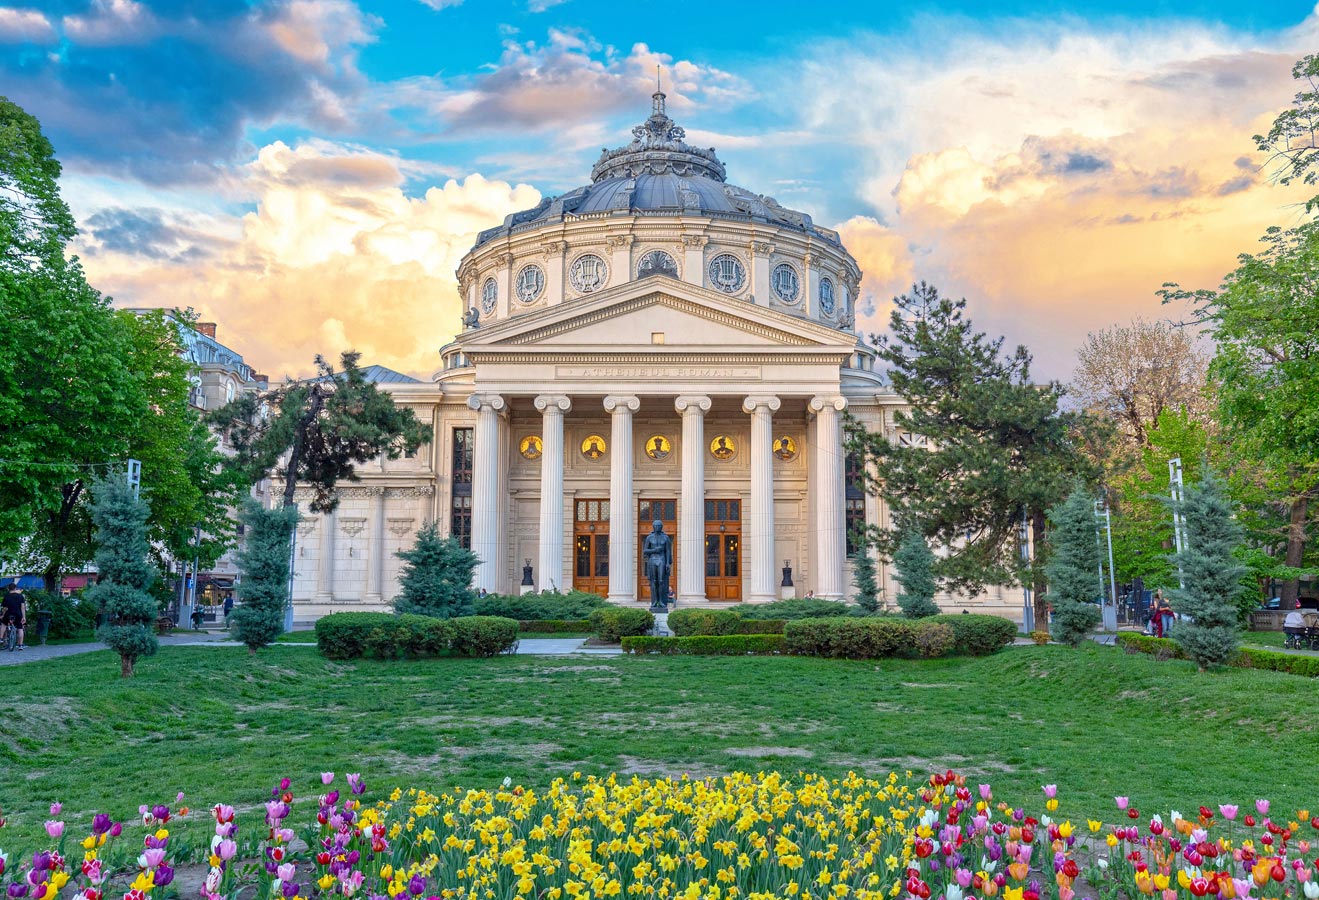 What to visit in Bucharest?